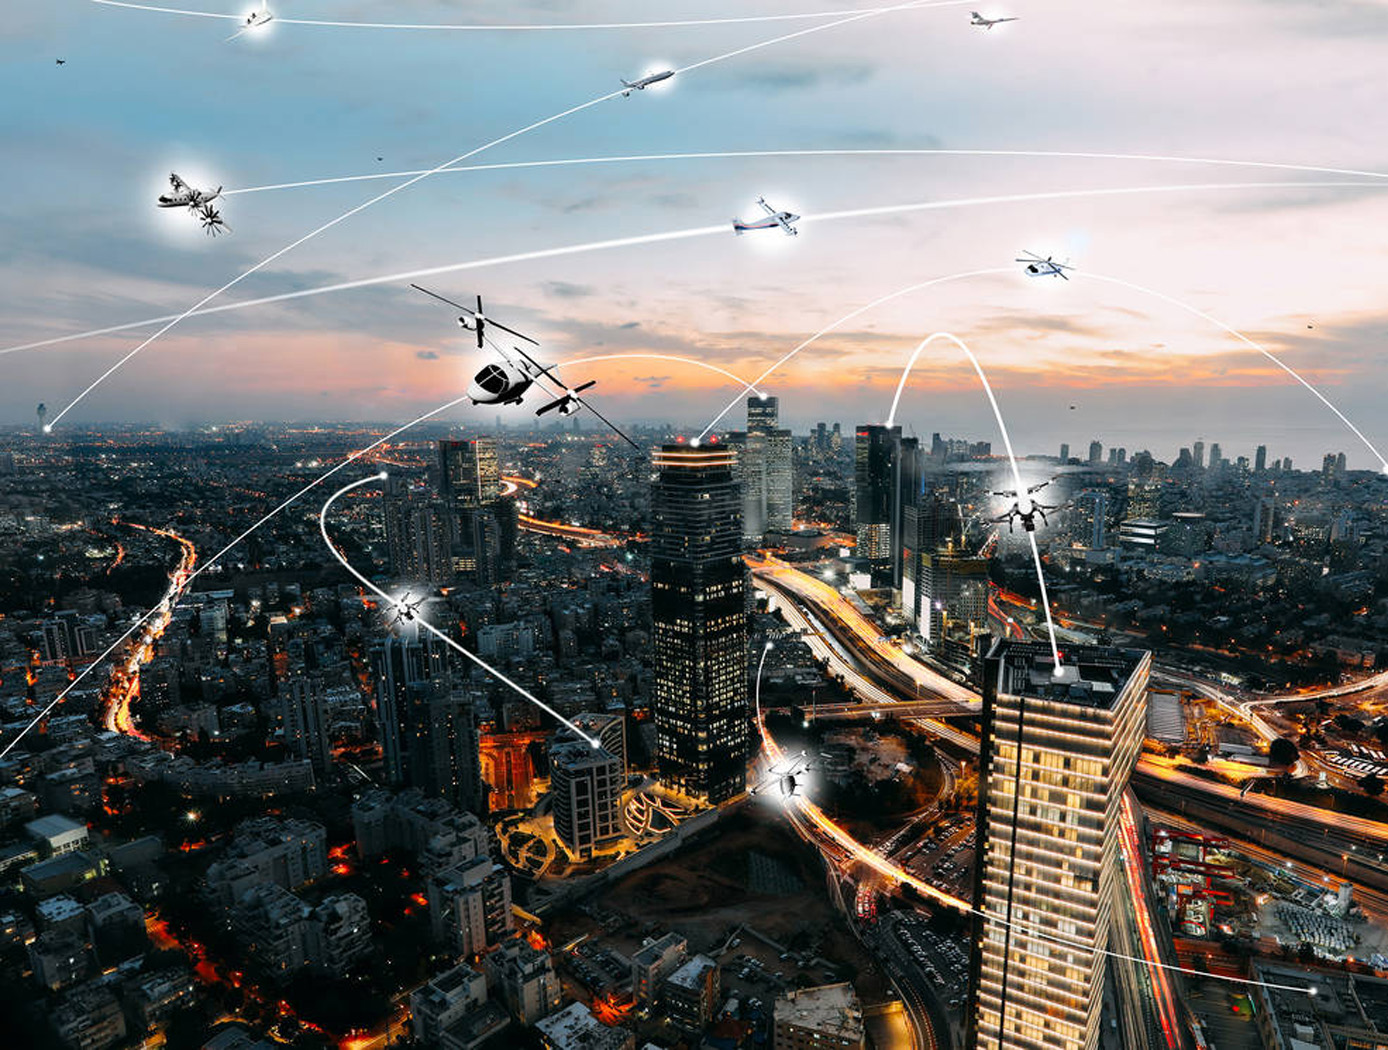 The concept of urban air mobility involves multiple aircraft safely operating within a city